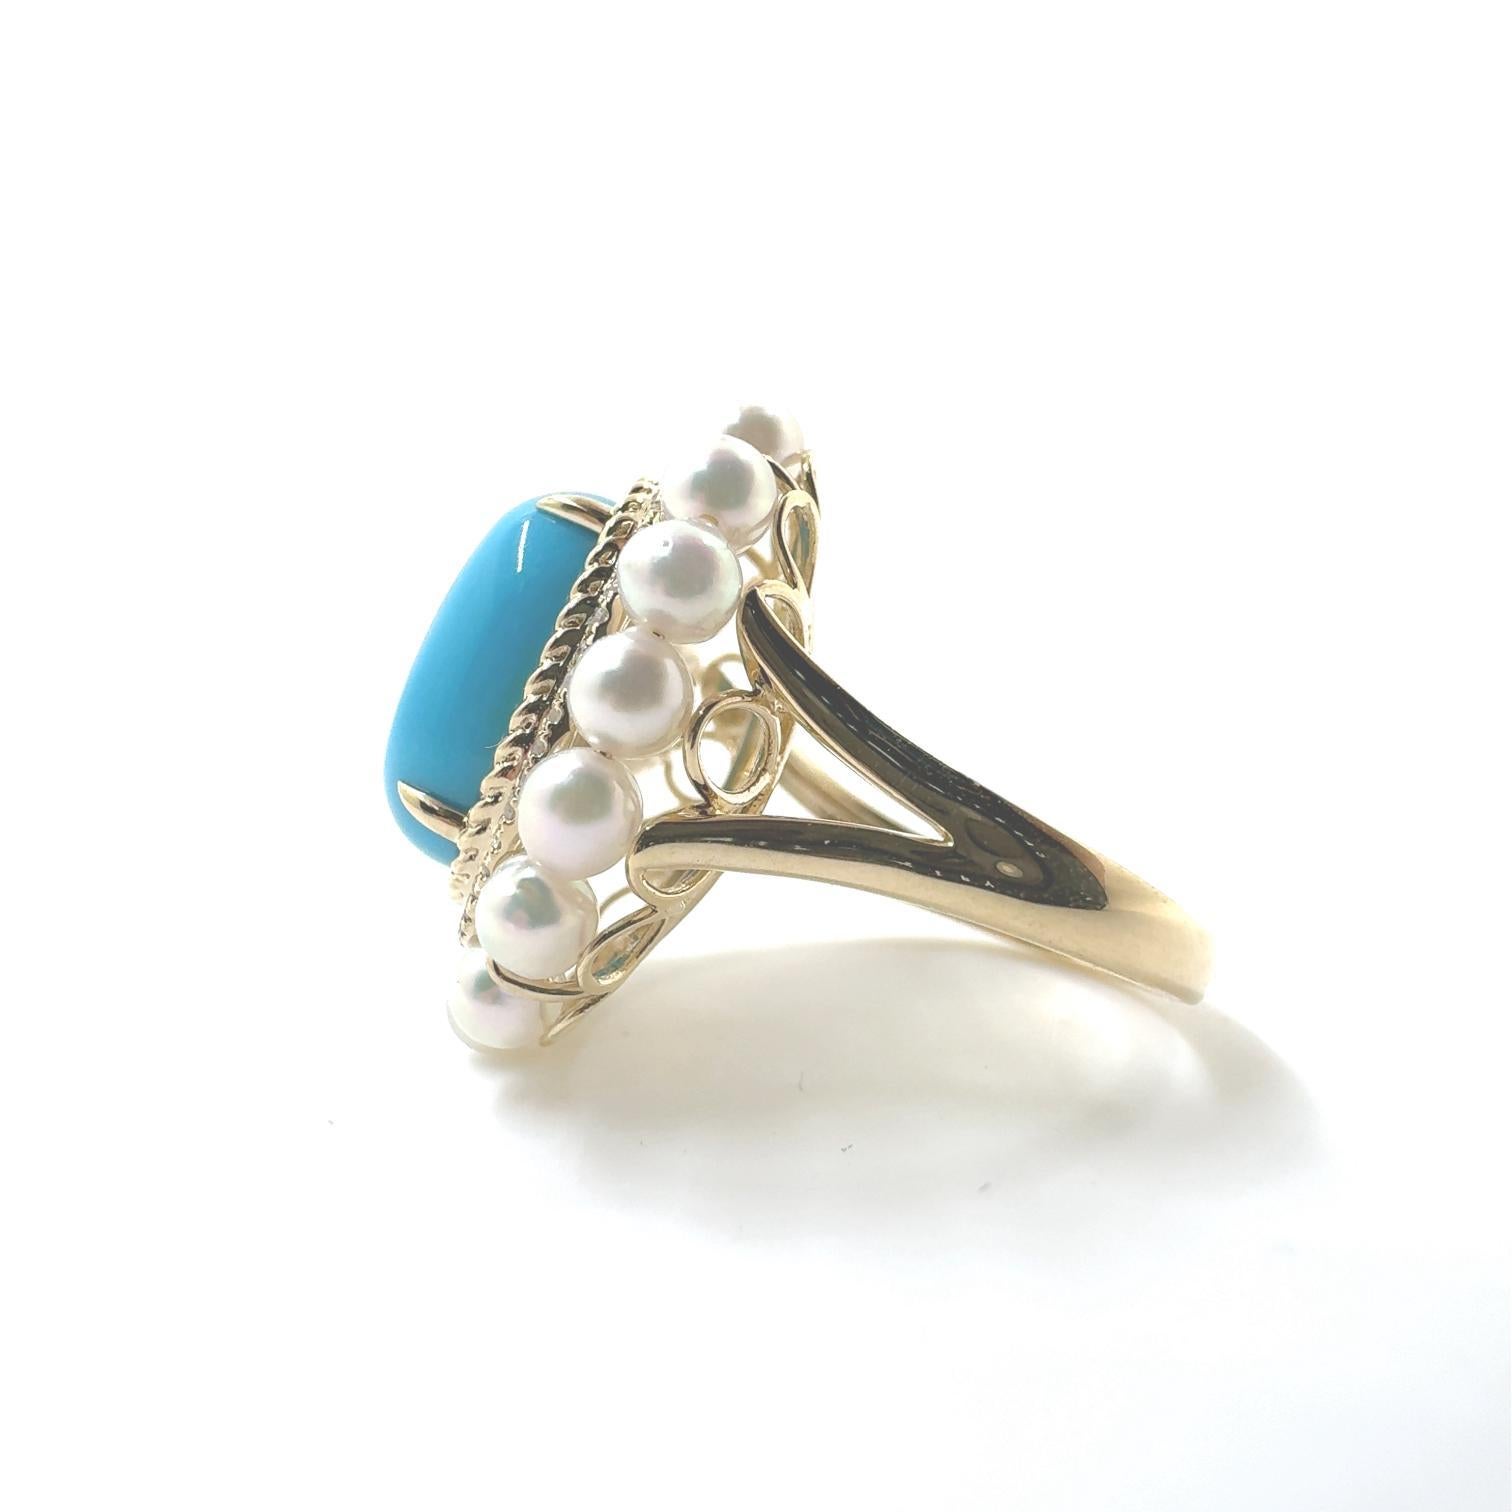 5.15Ct Turquoise Cabochon Pearl Diamond Ring in 14 Karat Yellow Gold 2